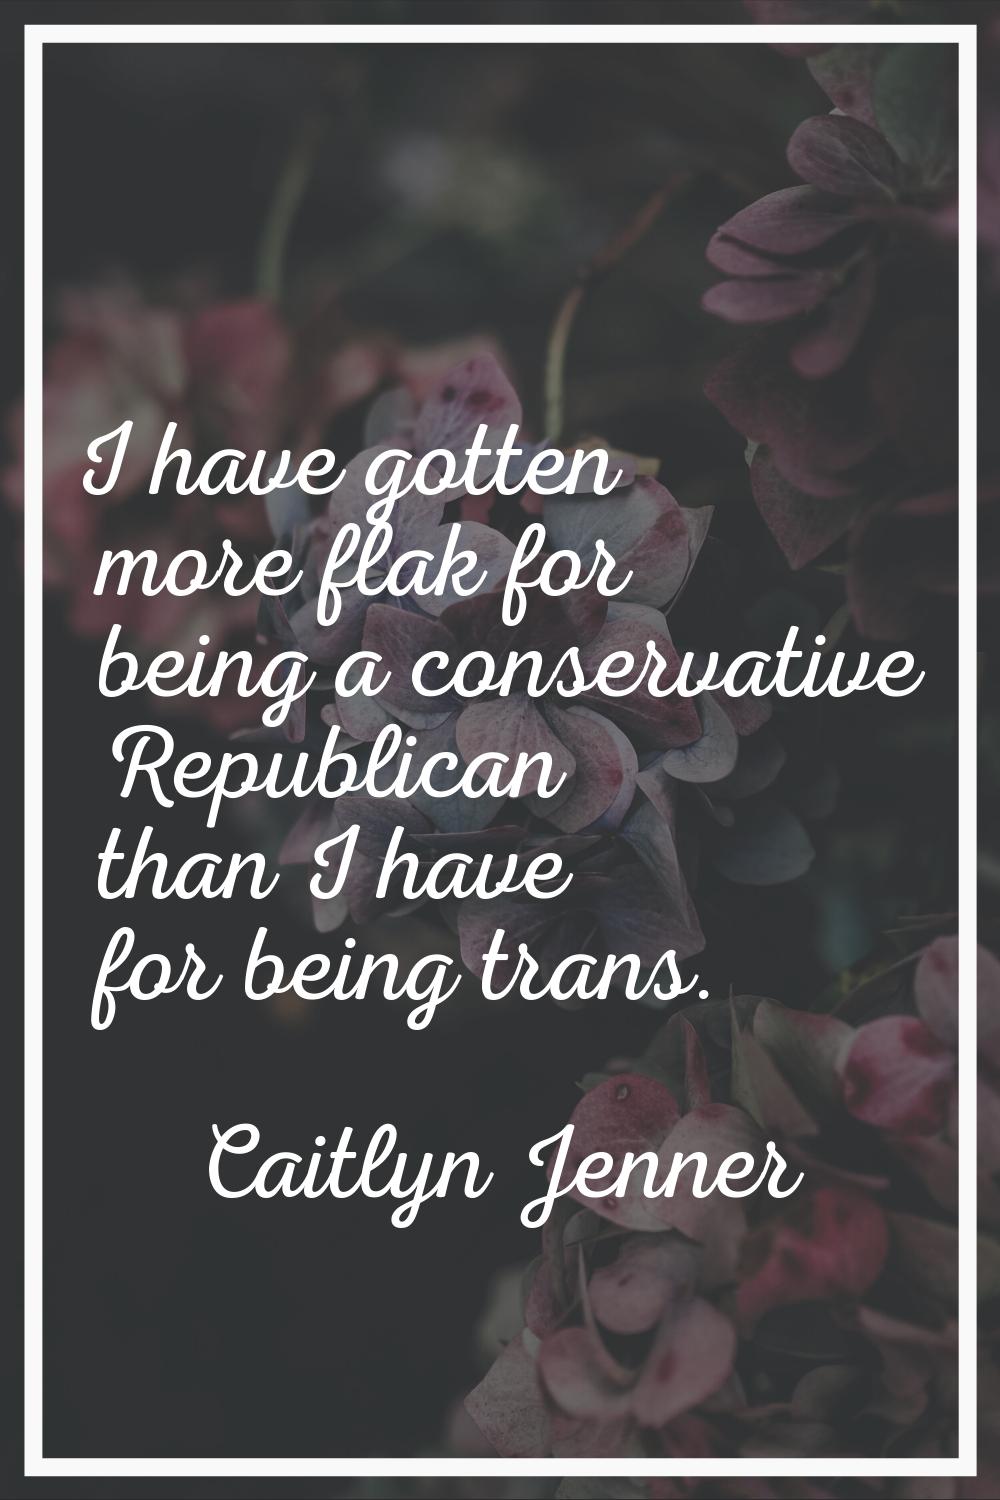 I have gotten more flak for being a conservative Republican than I have for being trans.